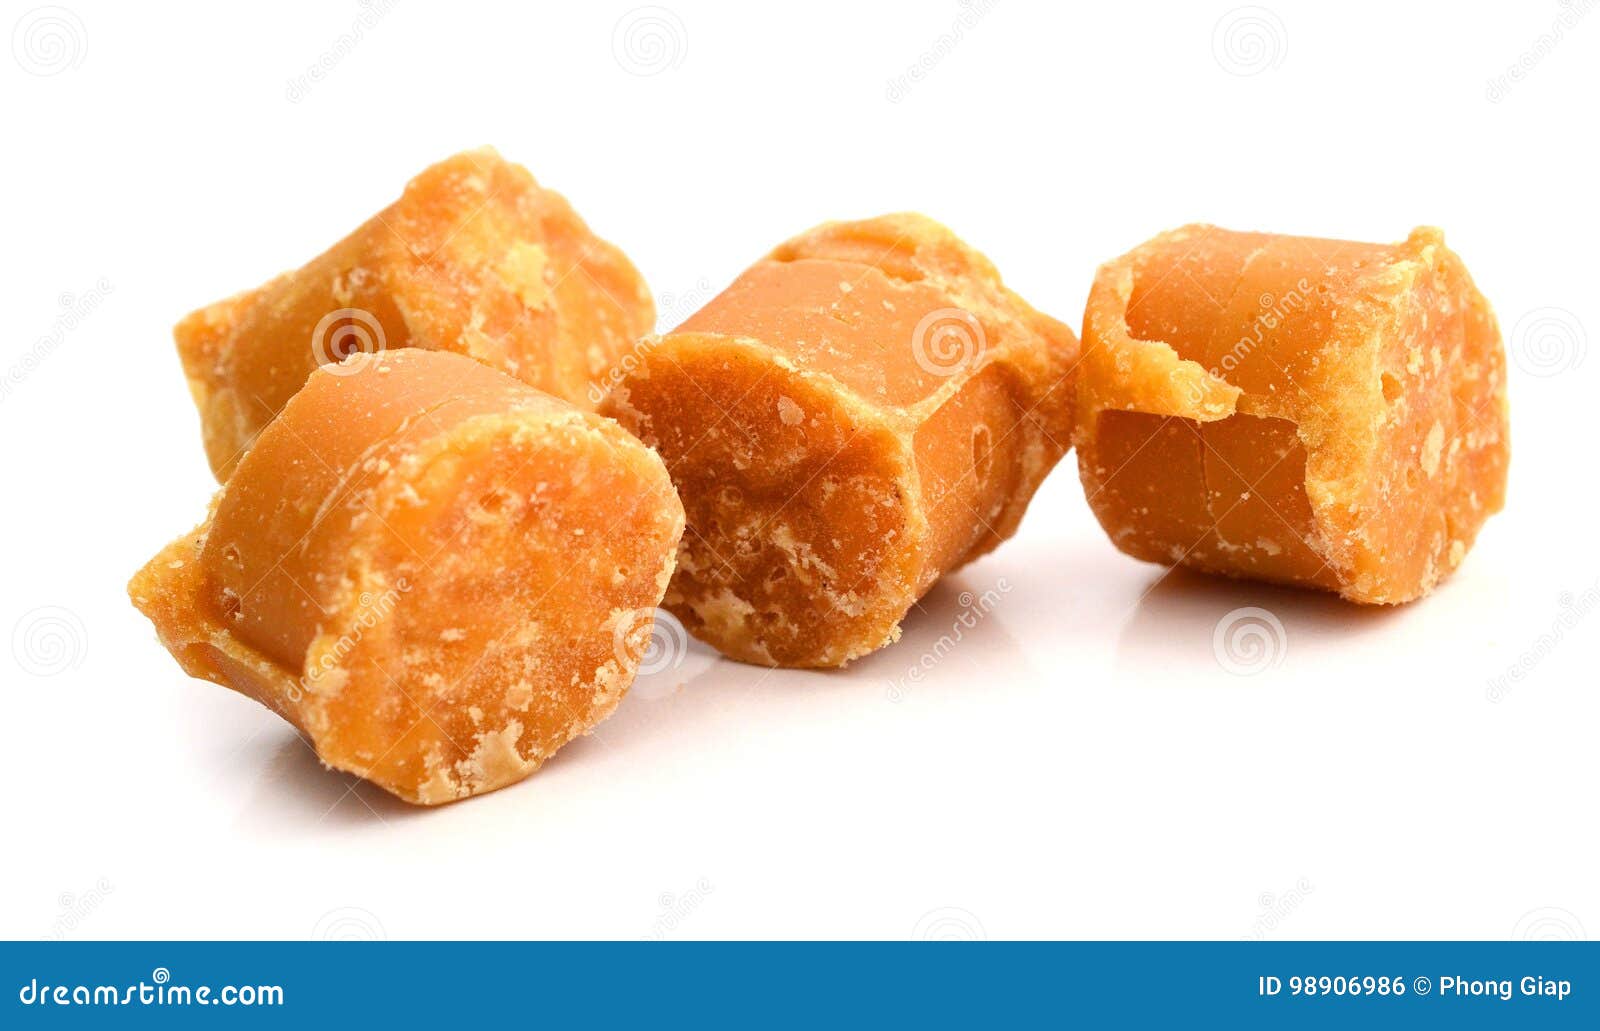 Indian jaggery sweet stock photo. Image of supplements - 98906986